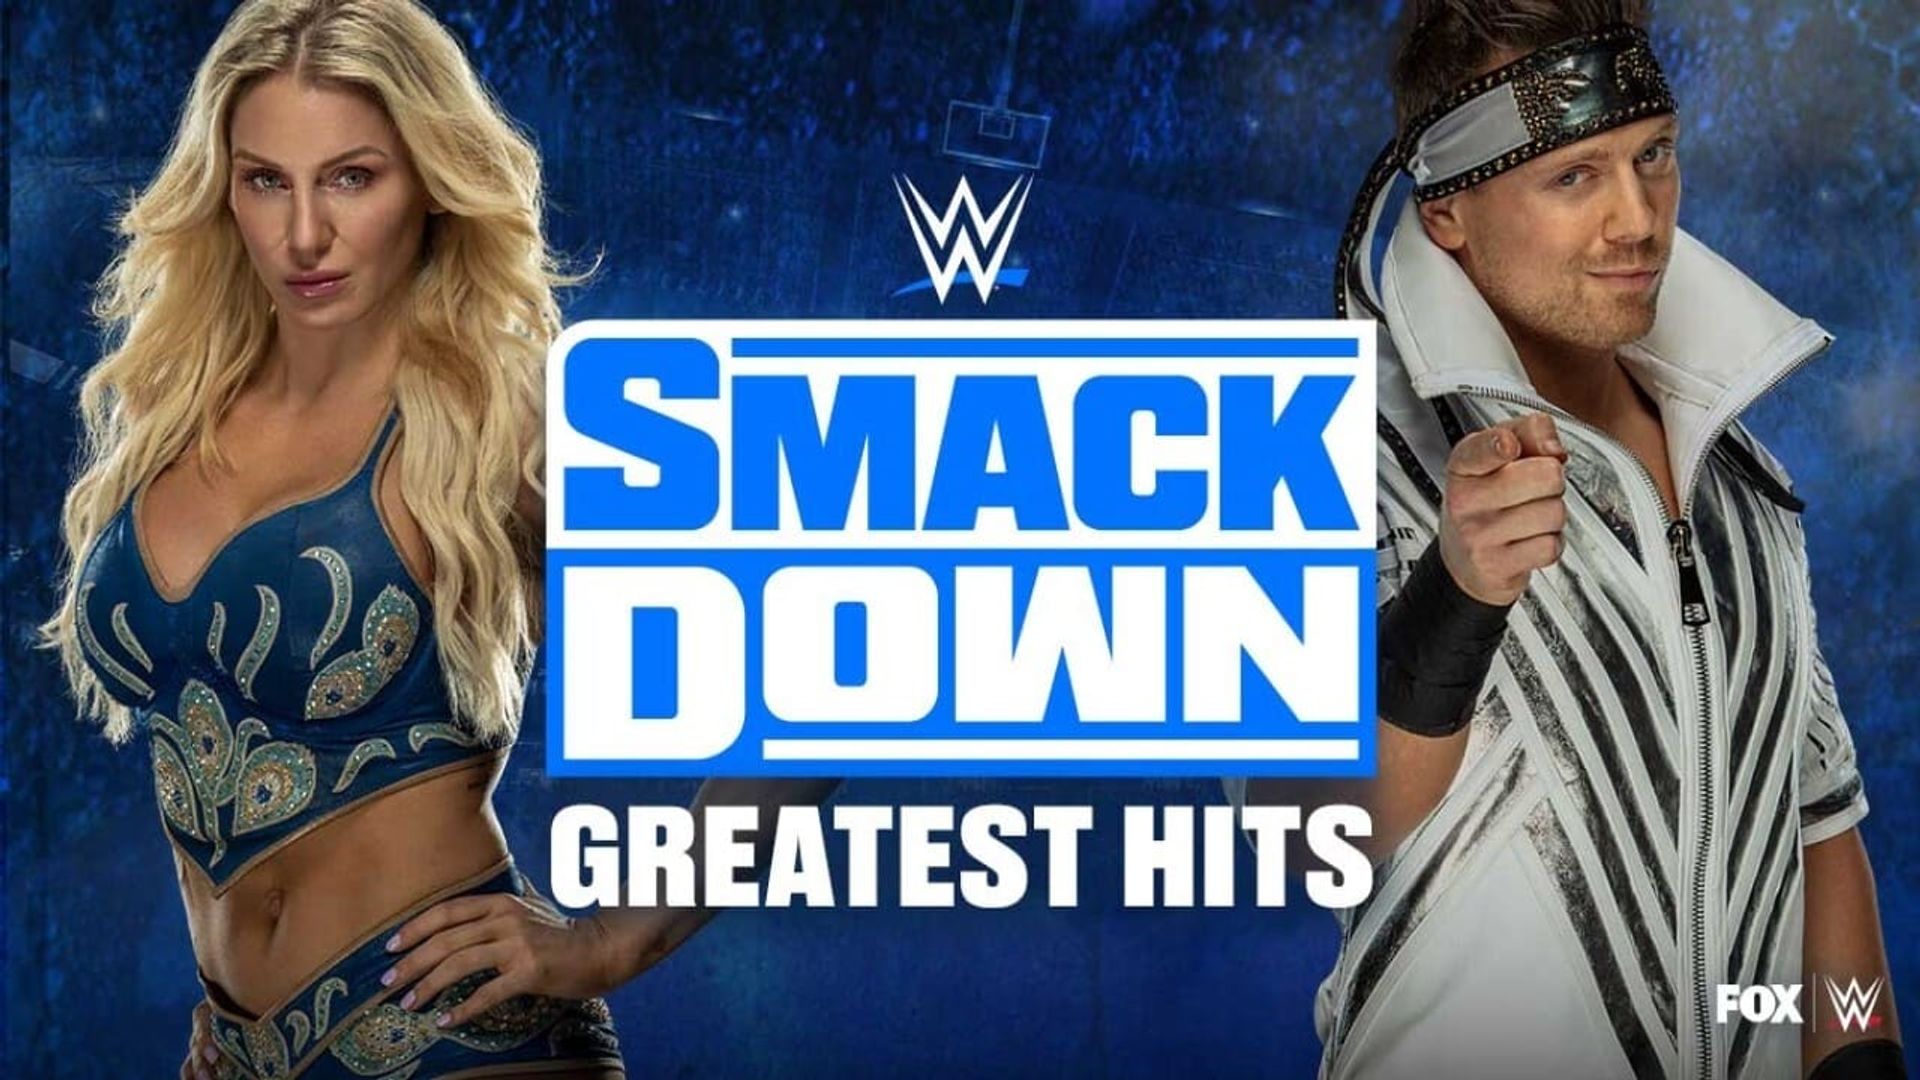 WWE SmackDown's Greatest Hits background